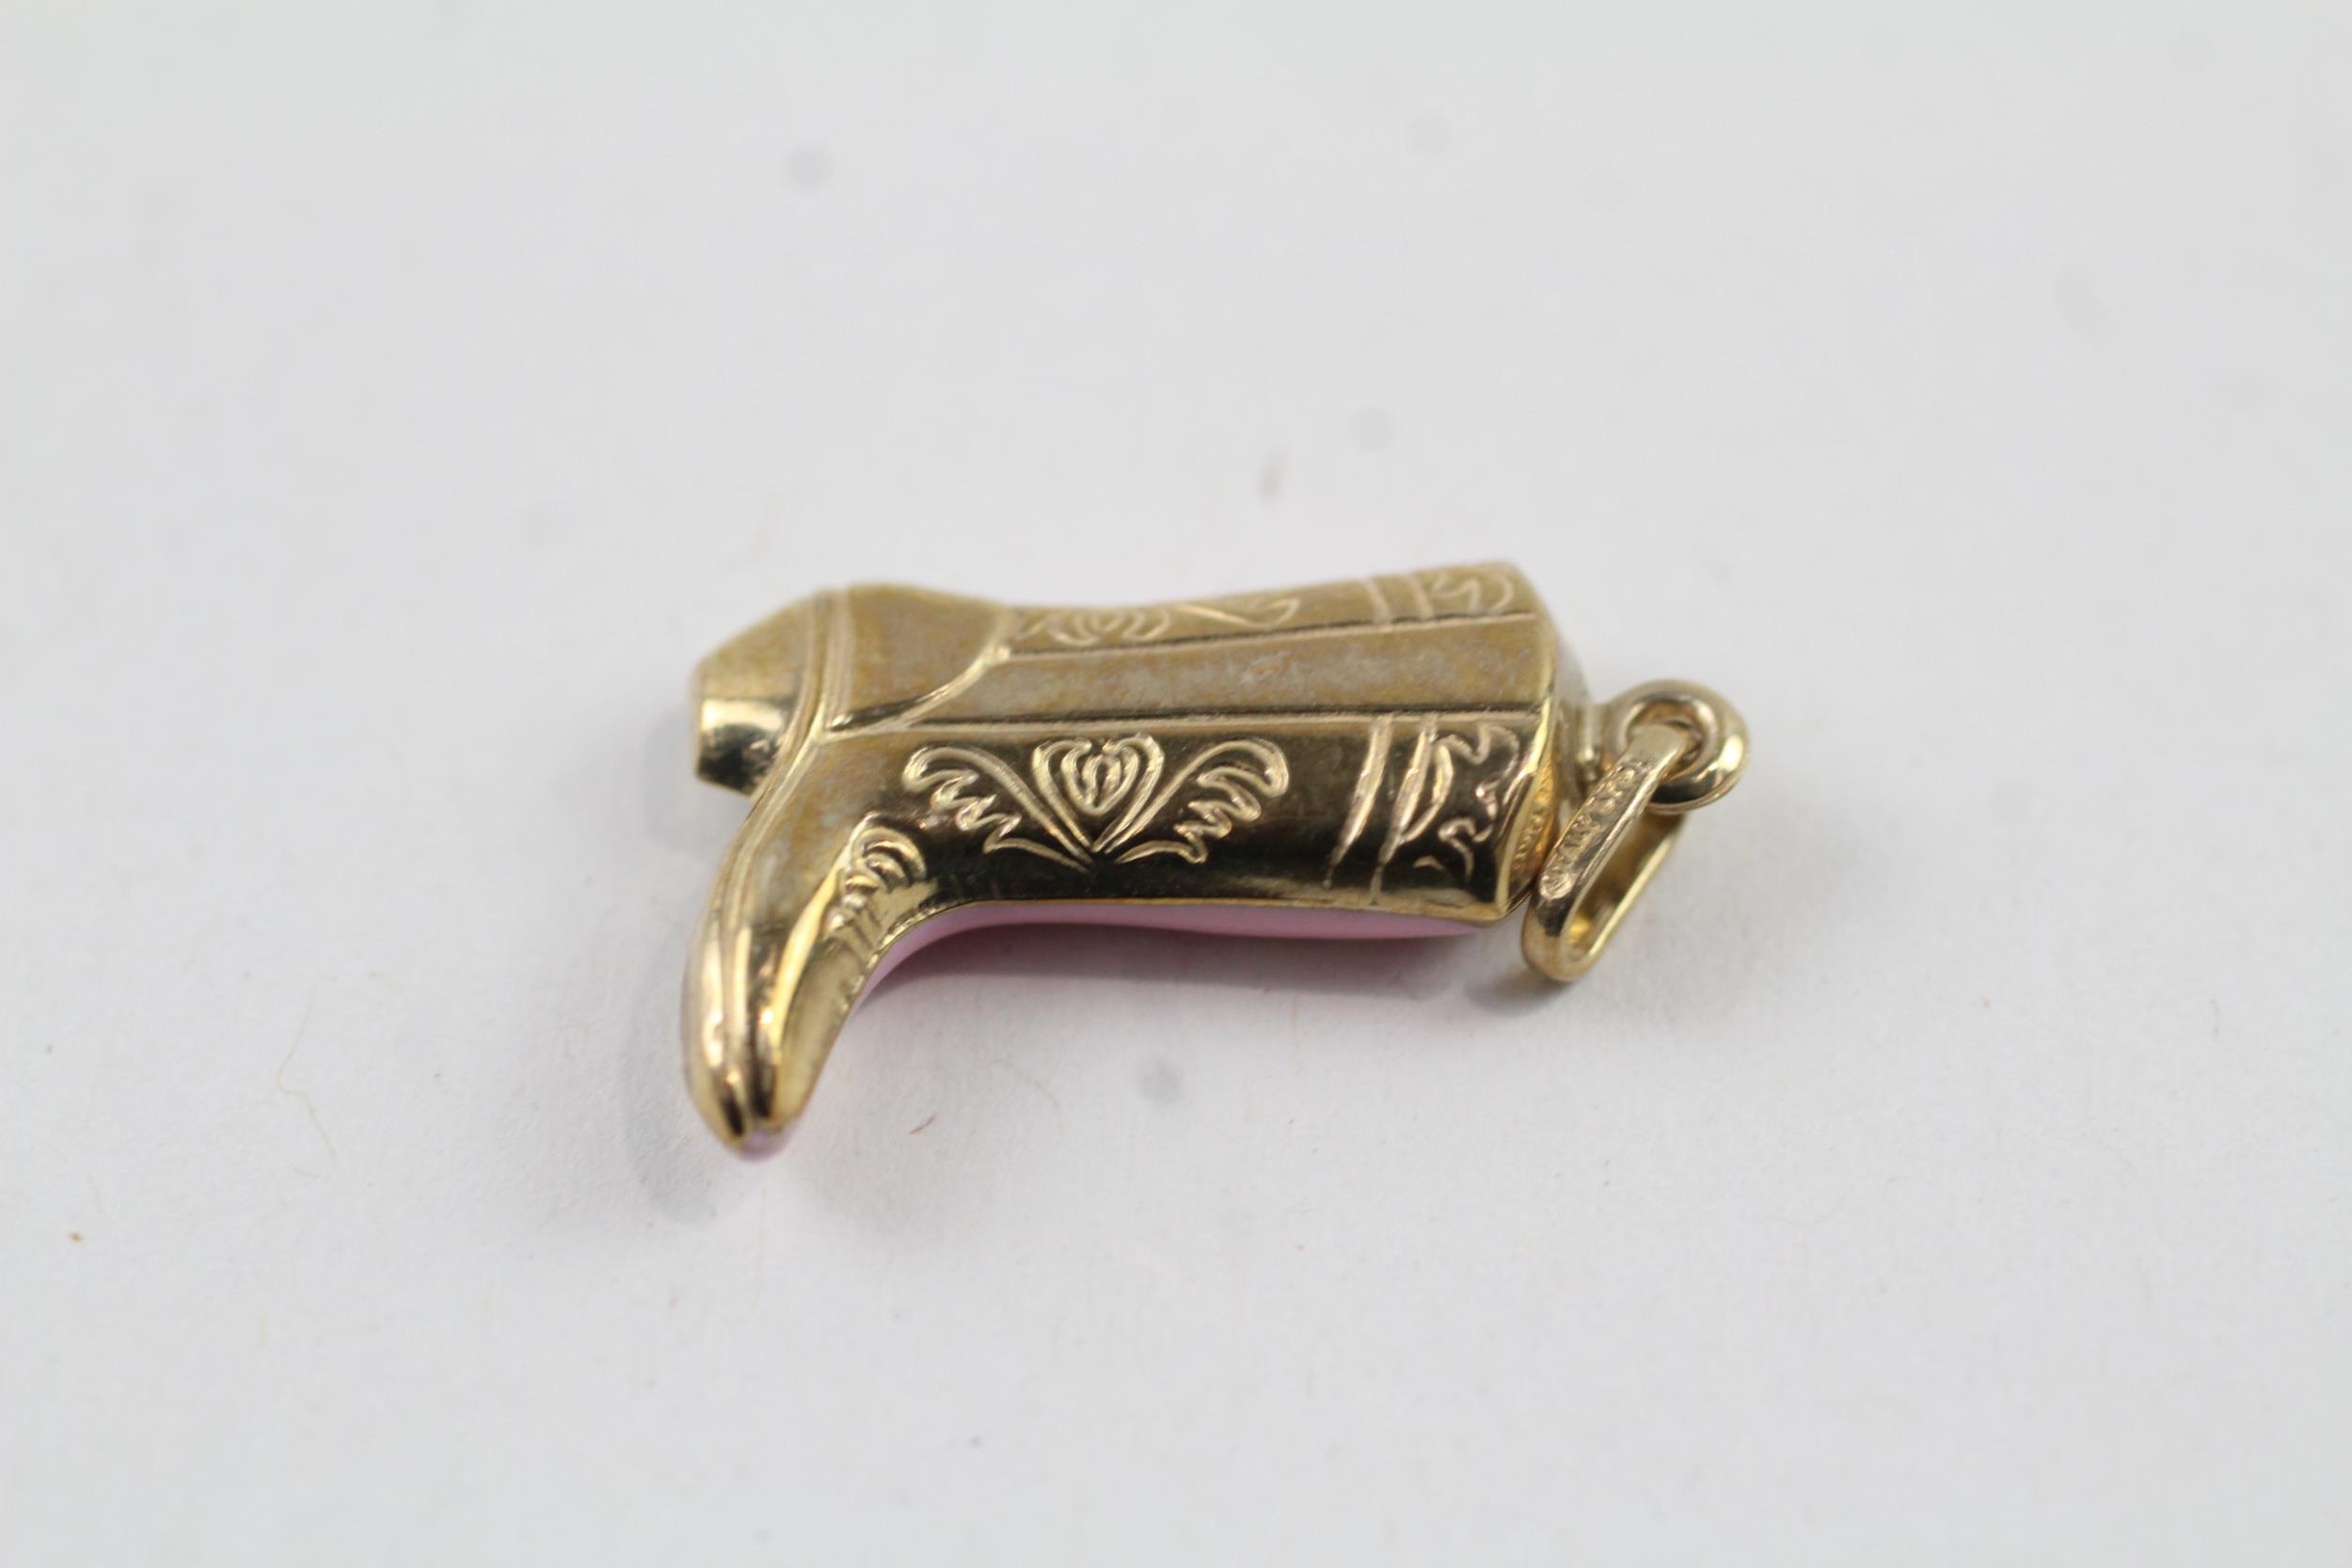 9ct gold pink enamel engraved patterned cowboy boot charm (0.7g) - Image 3 of 4